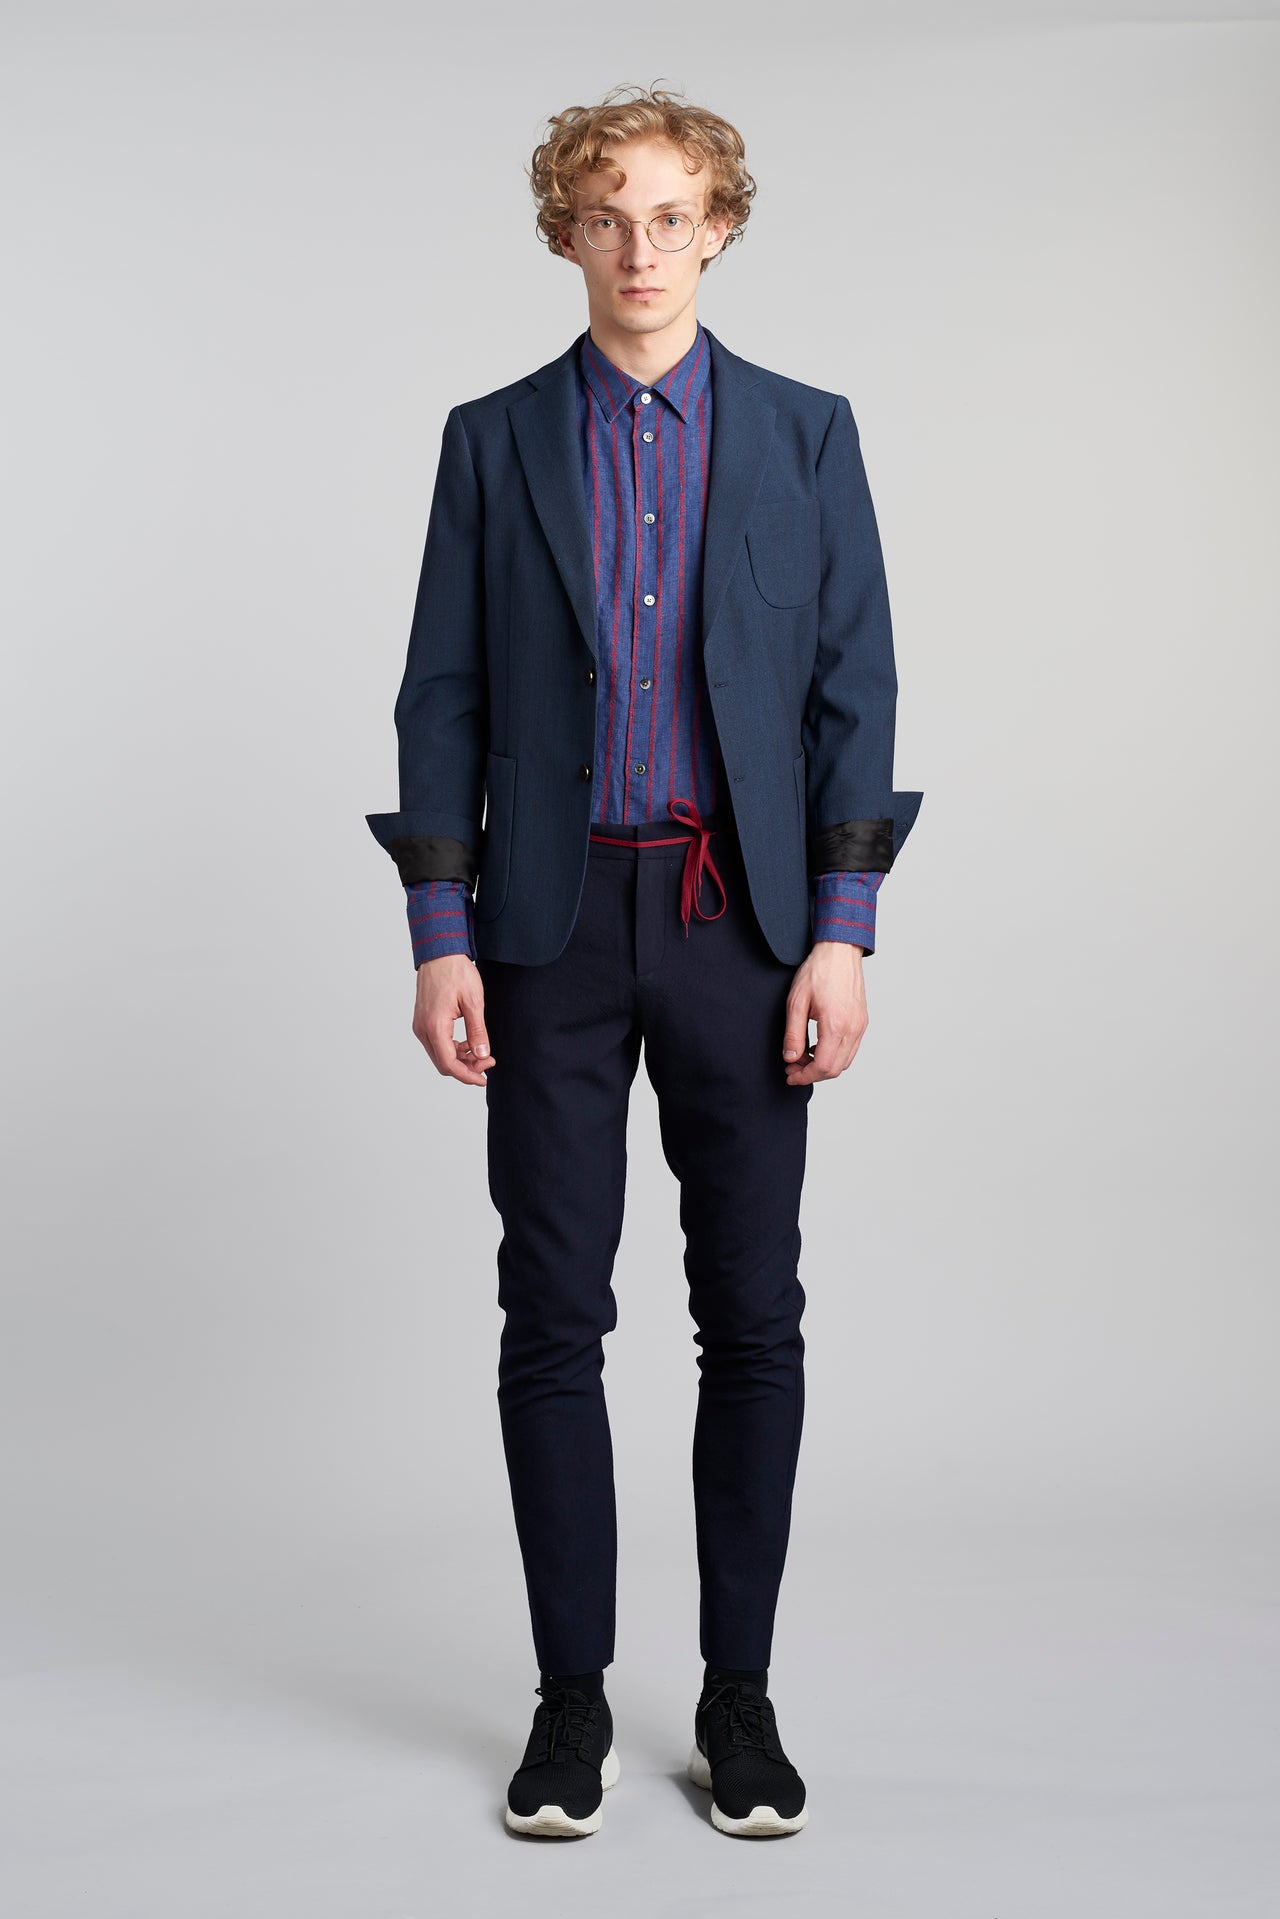 Trousers in the Finest Navy Blue Italian Soft Merino Wool by Bonotto